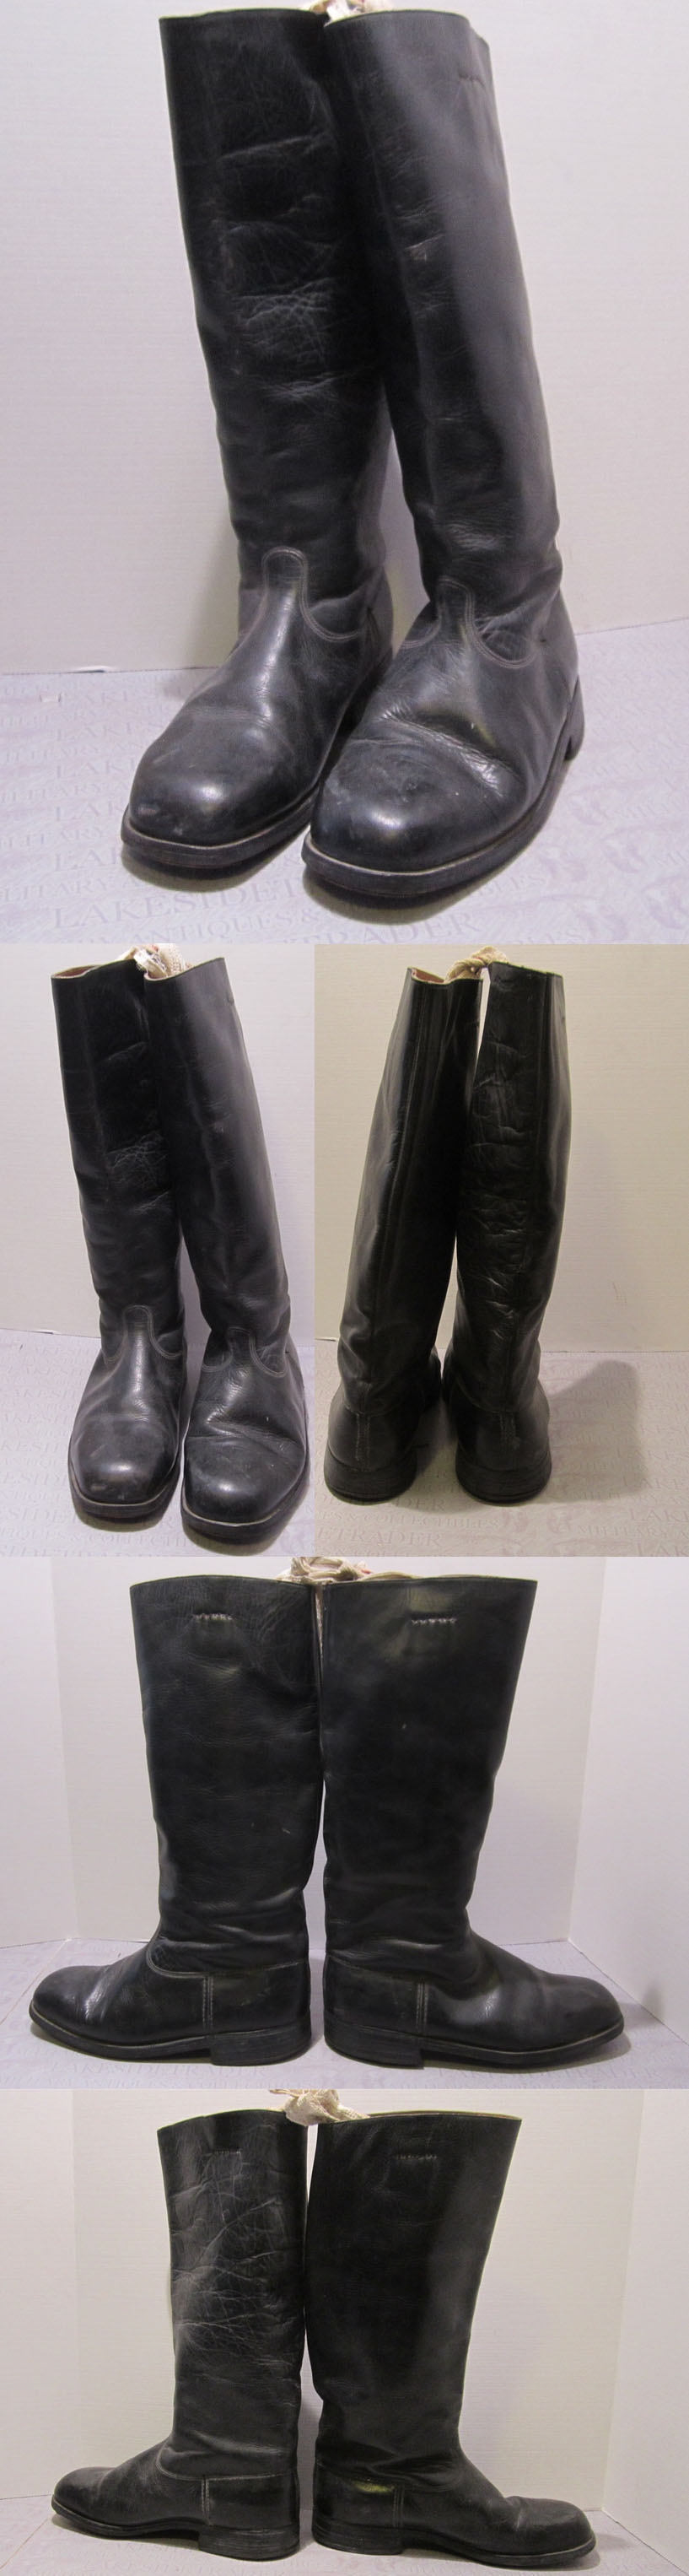 Army Officer Jack Boots